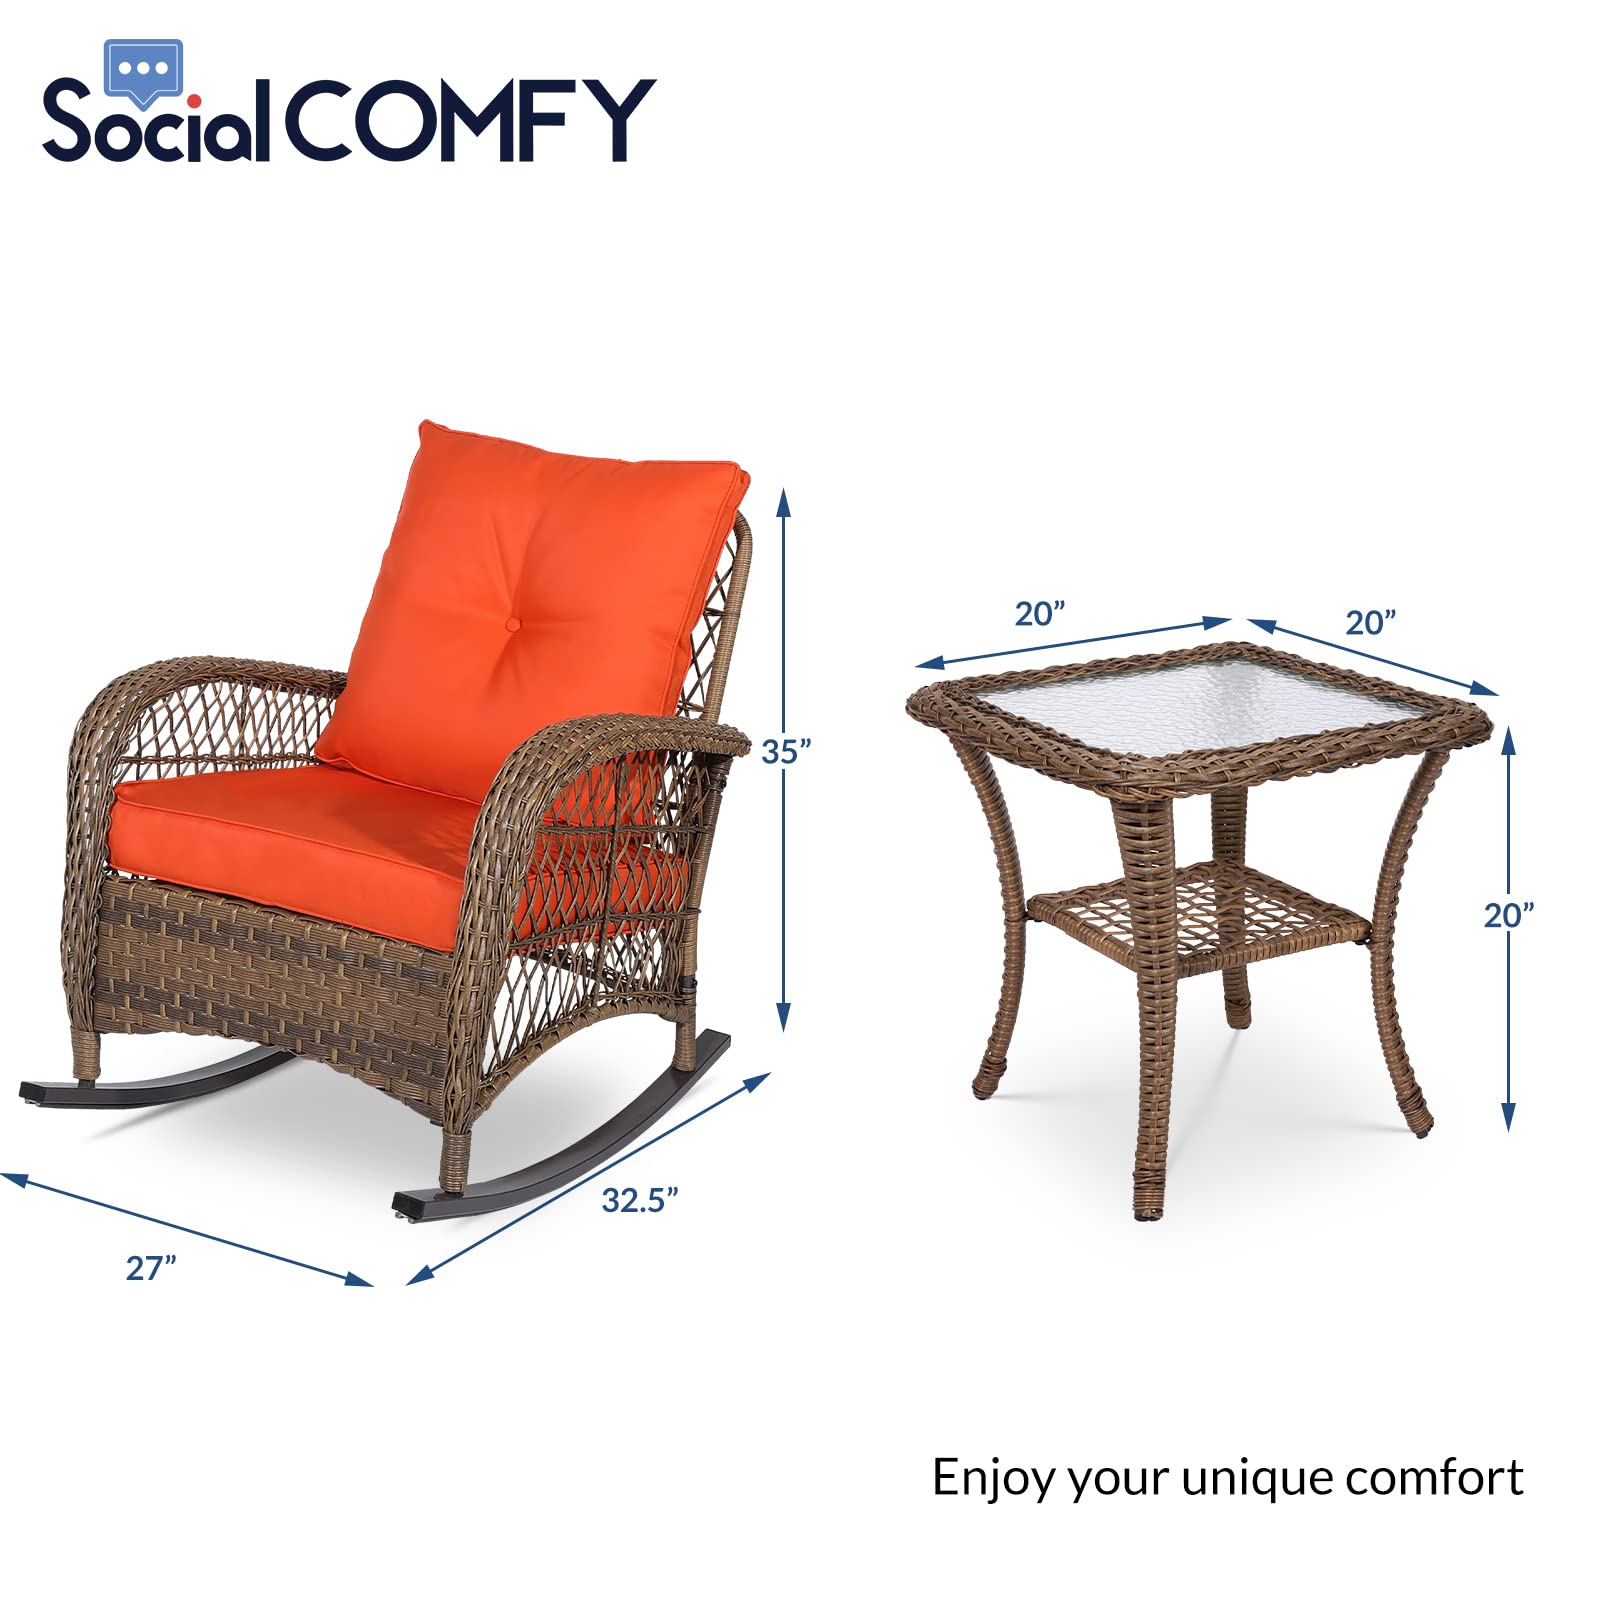 SOCIALCOMFY 3-Piece Outdoor Wicker Rocking Chair Set, Patio Bistro Conversation Sets with Cushions and Glass-Top Coffee Table, Rattan Furniture Sets for Porch & Backyard, Orange - image 4 of 7